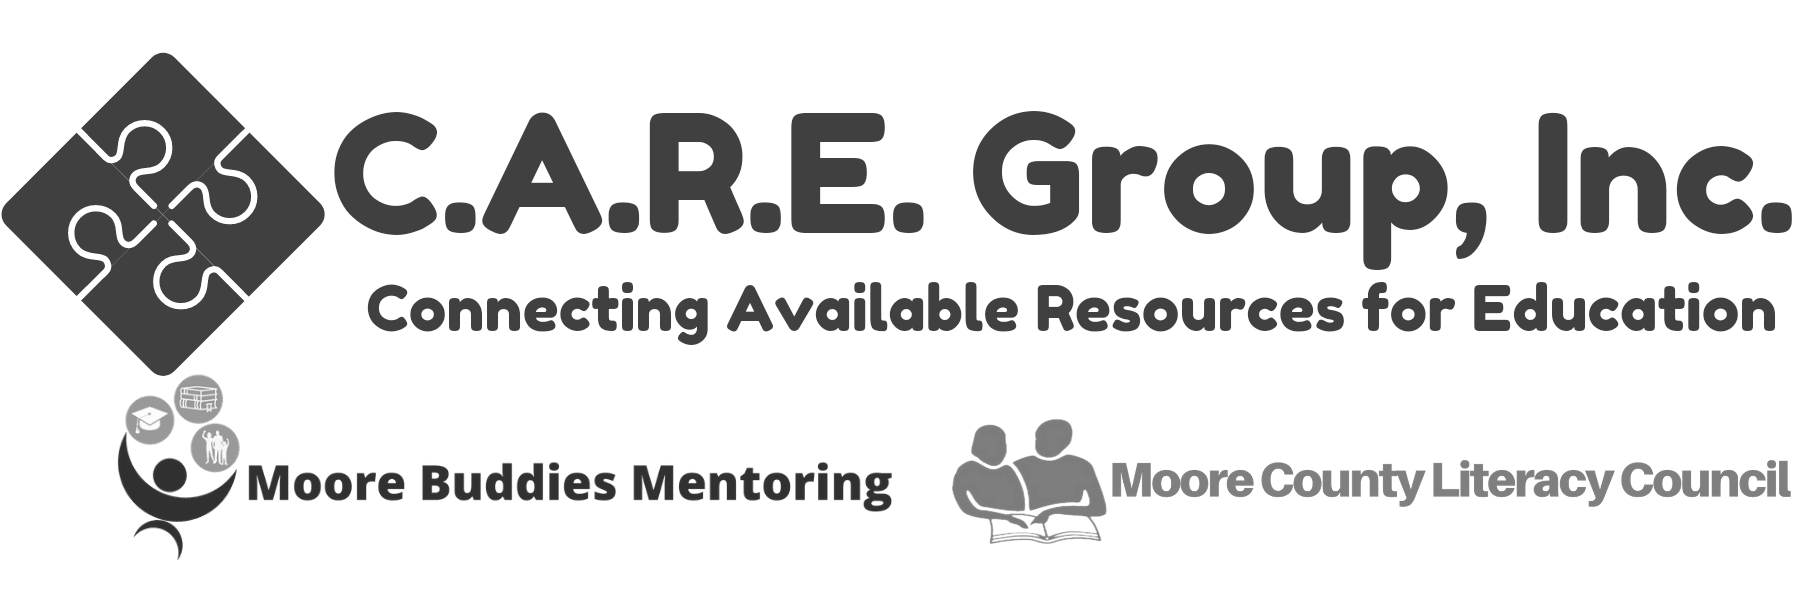 Moore Buddies Mentoring: Because a Caring Adult is